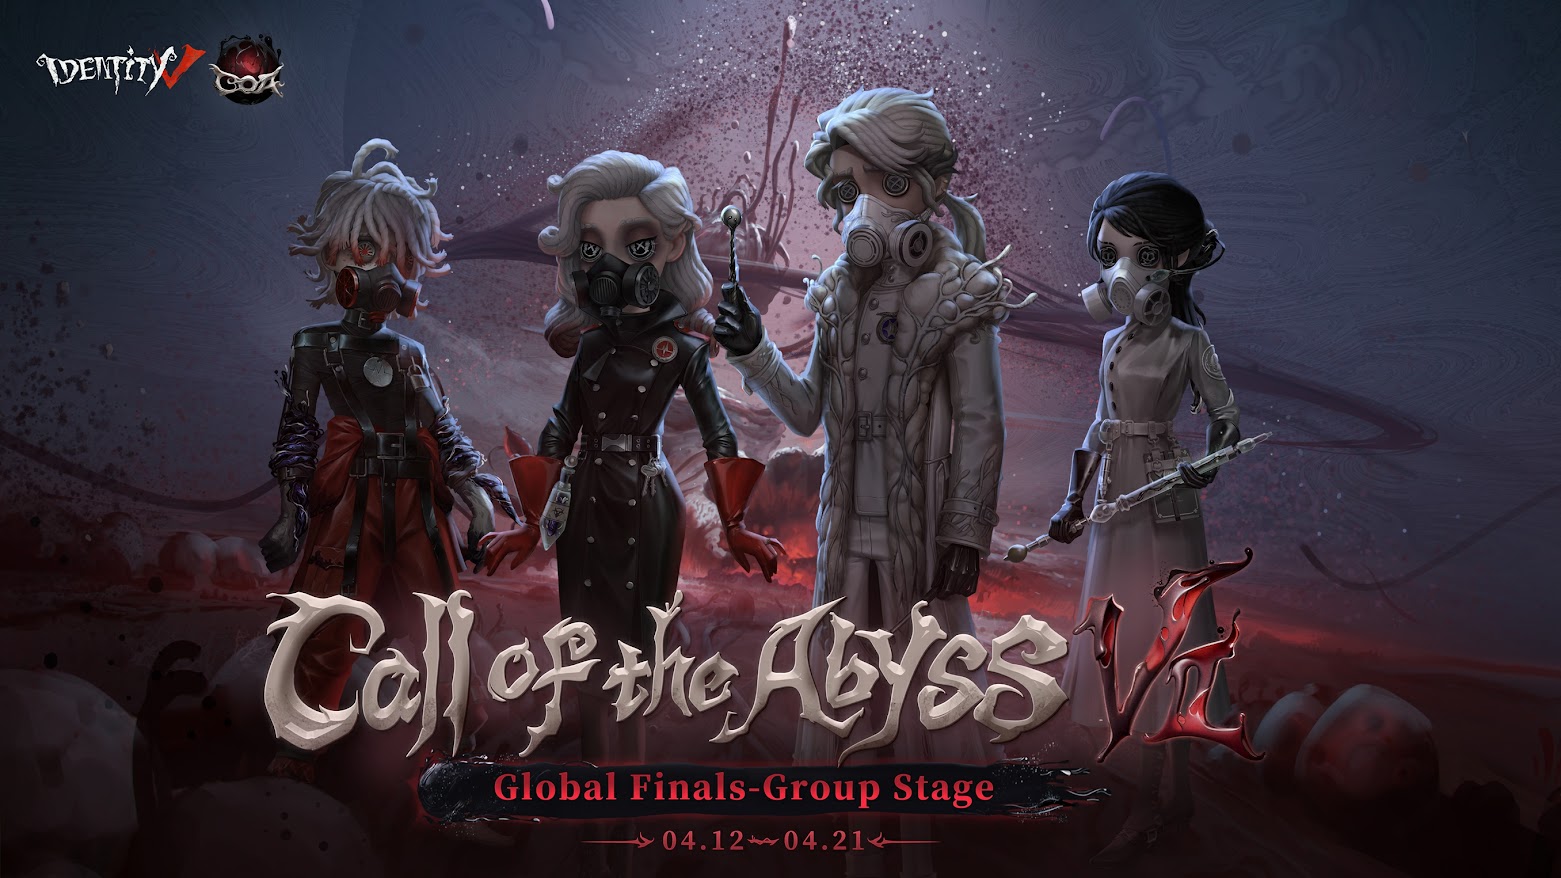 Call of the Abyss Ⅶ Global Finals Group Stage